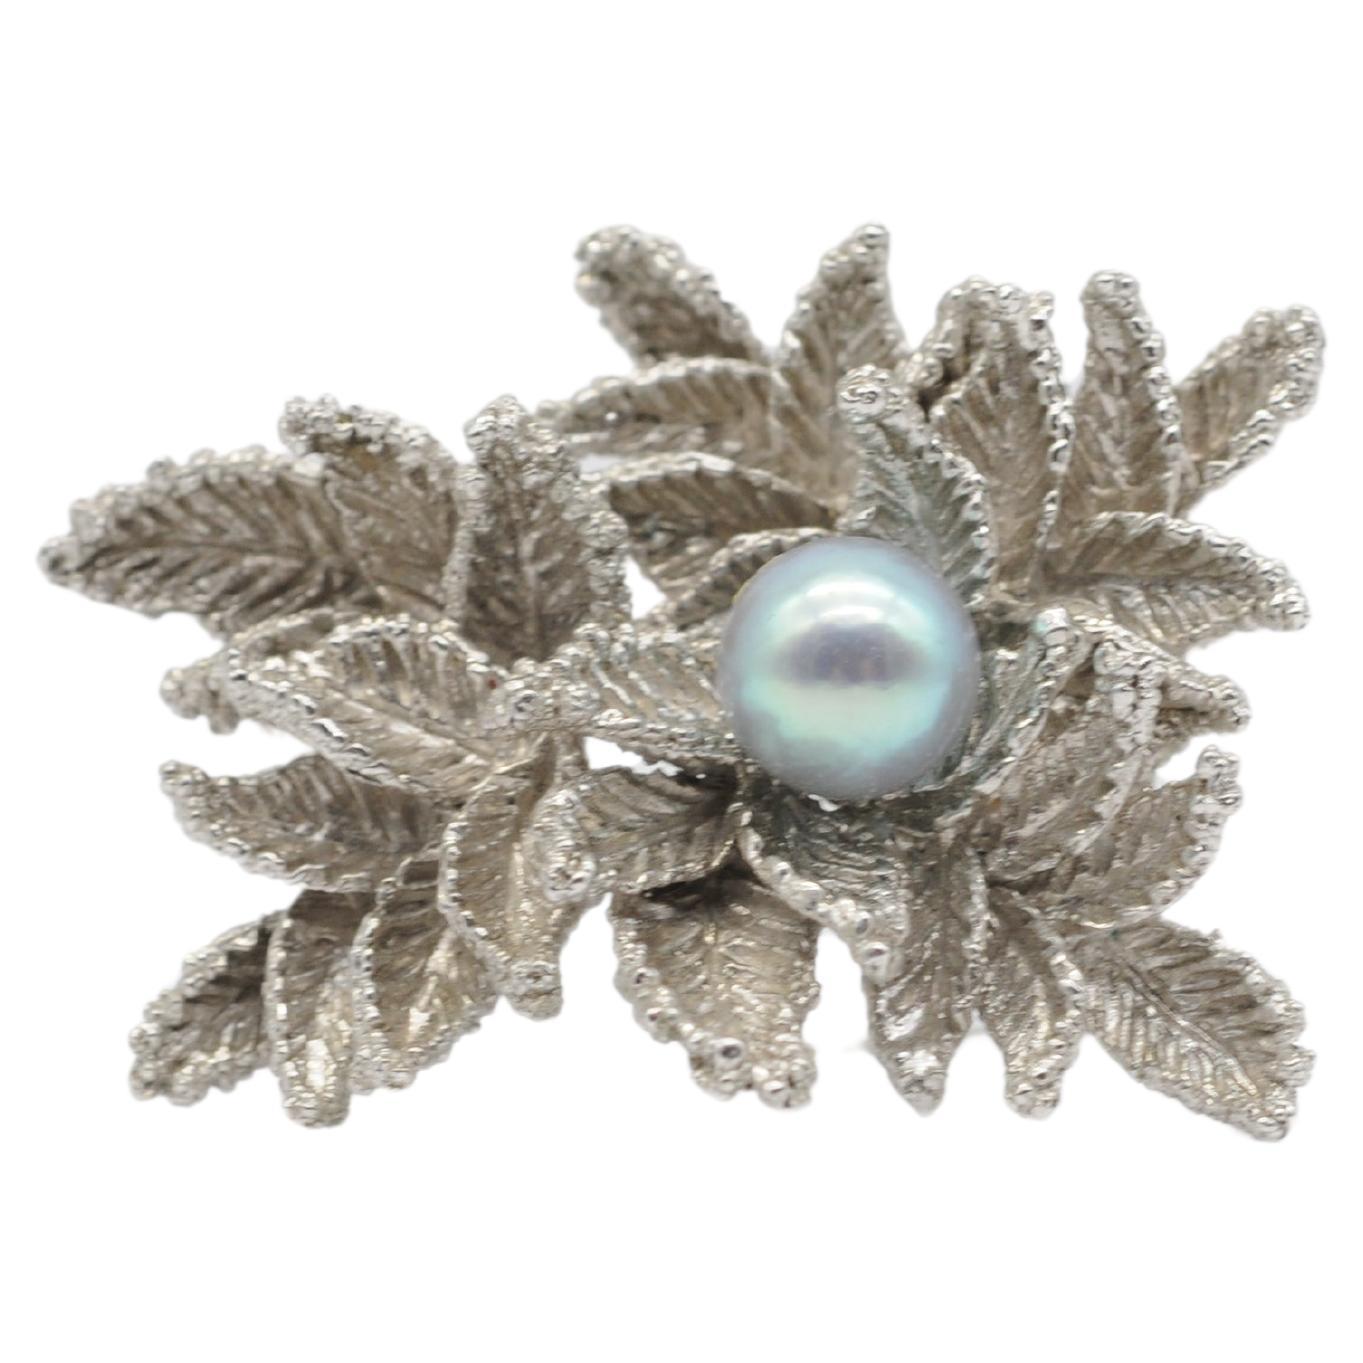 Immerse yourself in the enchanting beauty of this stunning 14k white gold brooch, designed in a captivating leaf-like motif that conceals within its folds a magnificent dark Tahitian pearl. This charming piece exudes an irresistible allure,